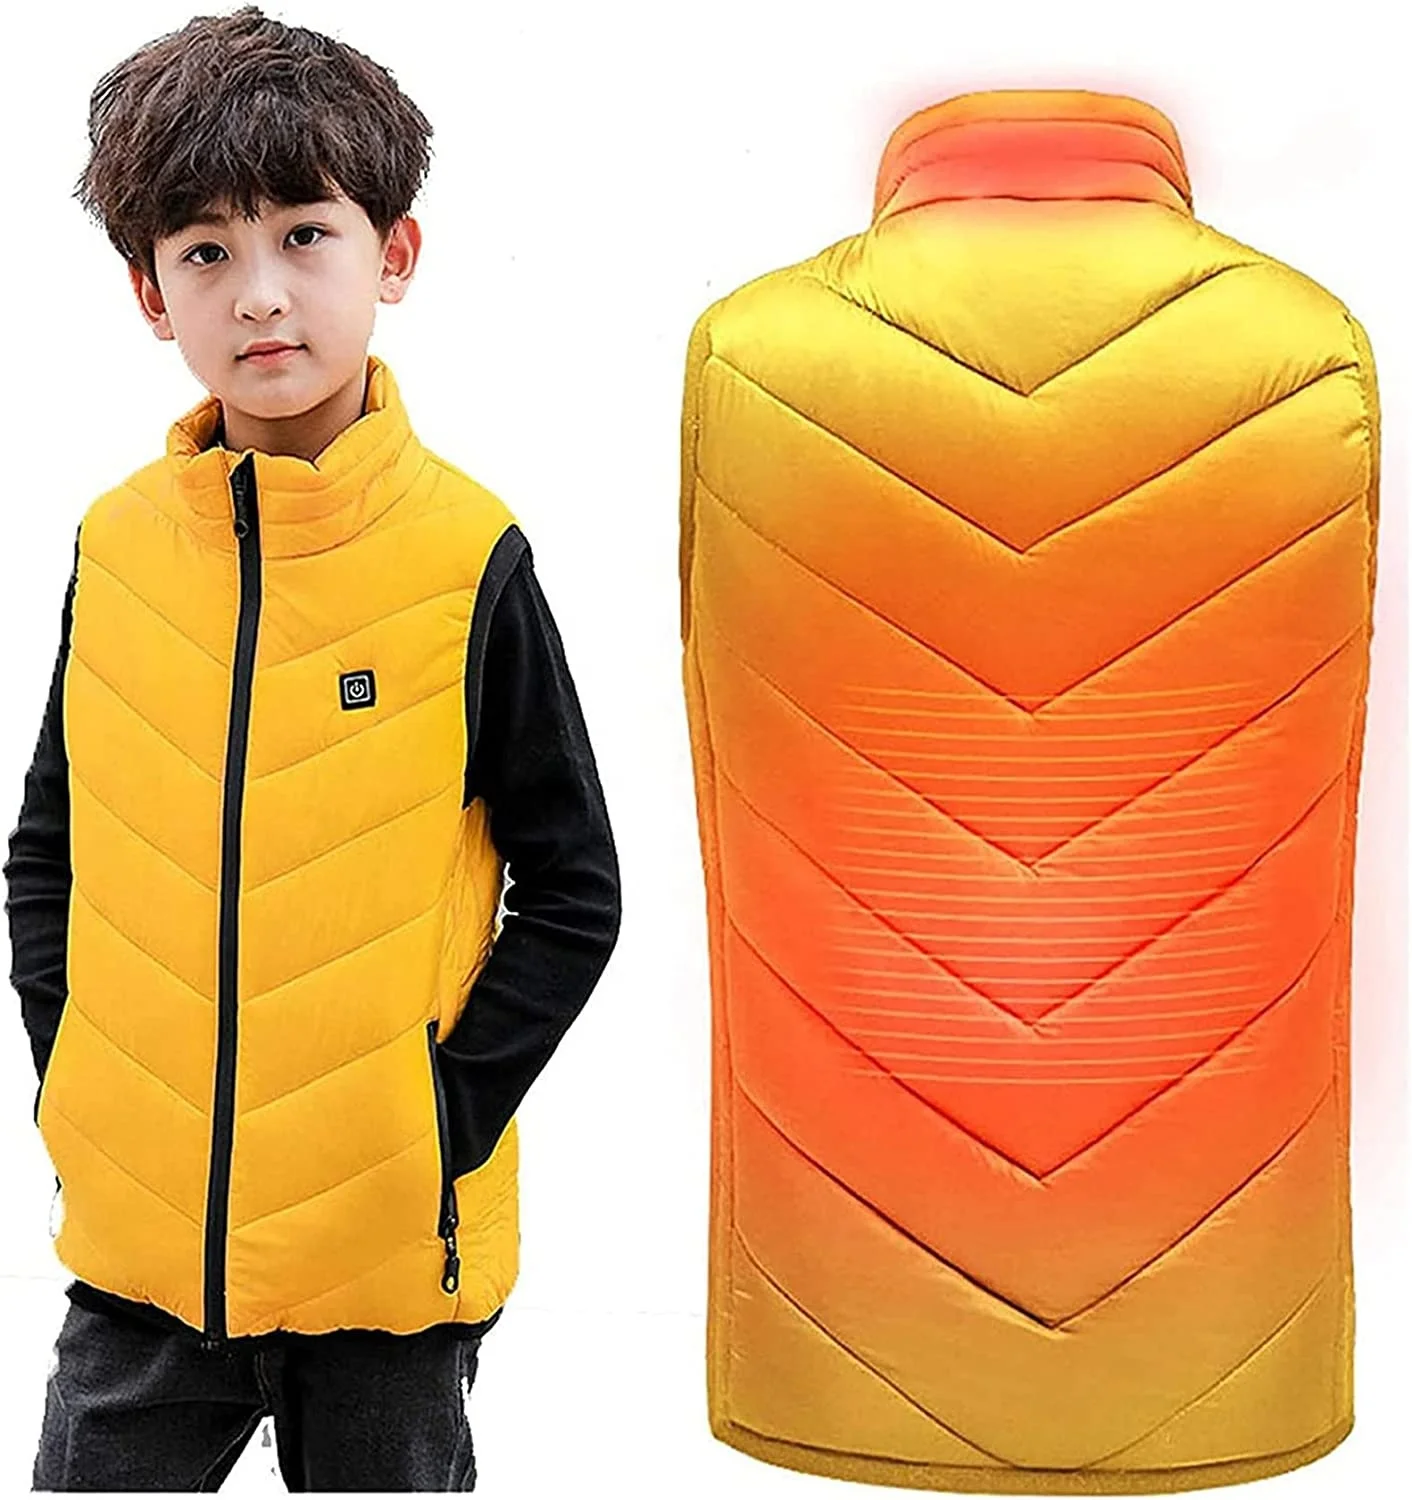 

Children's Heated Vest Rechargeable Battery Gilet Teenagers 2 Zones Heated Outdoor Safety Heated Vest USB Battery Not Included